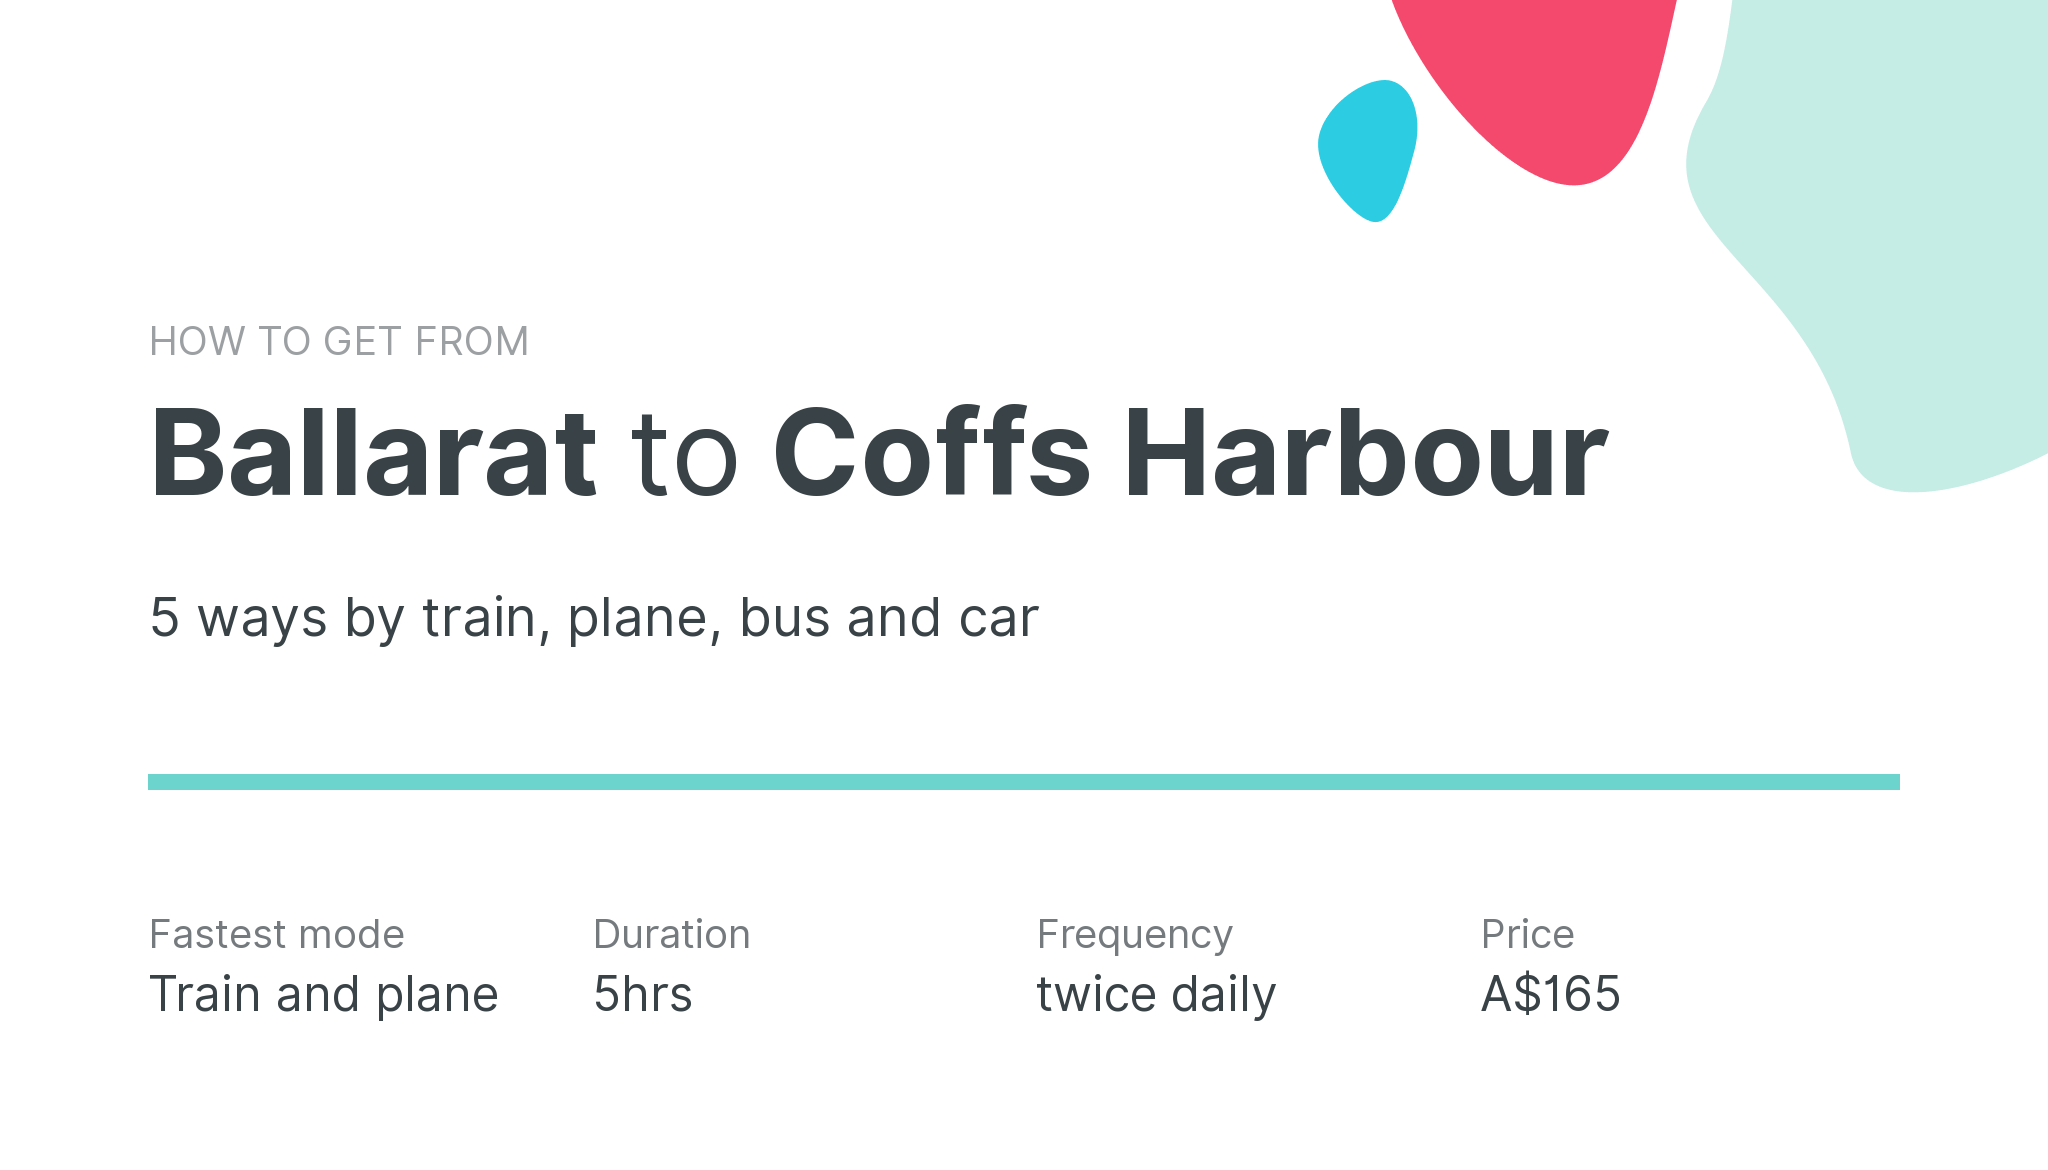 How do I get from Ballarat to Coffs Harbour